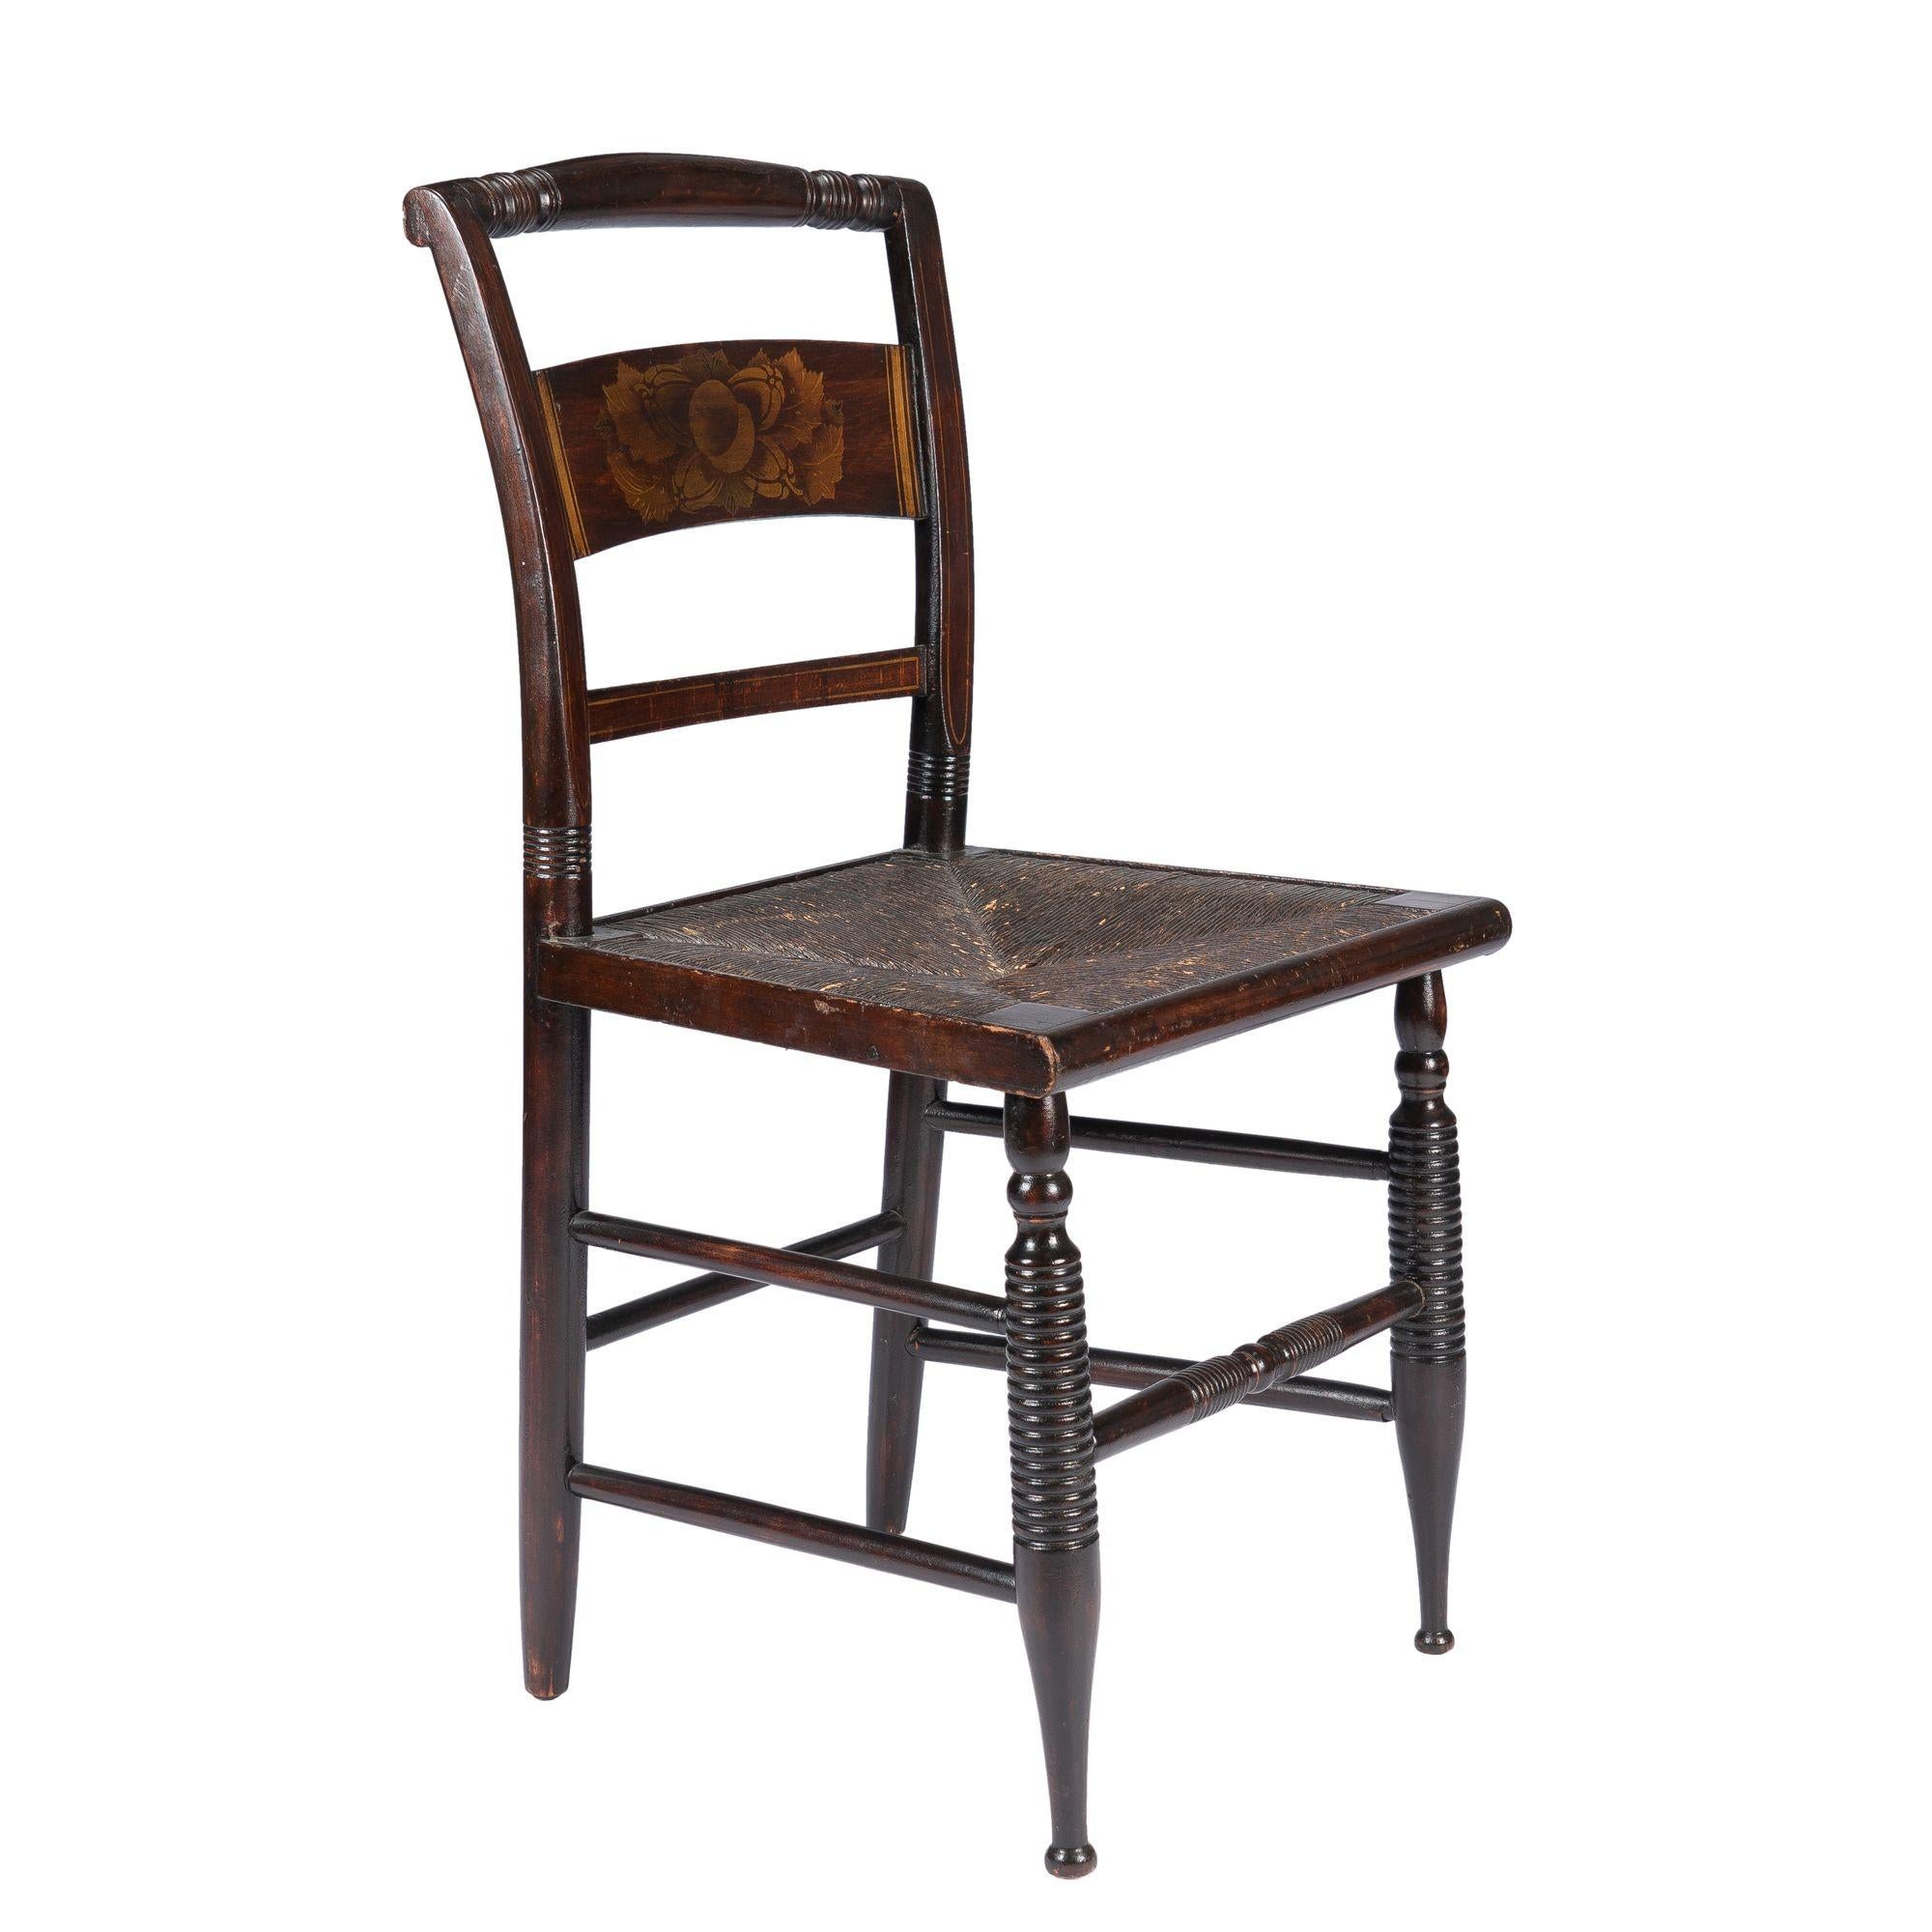 Connecticut Valley Hitchcock rush seat side chair, 1820 For Sale 2